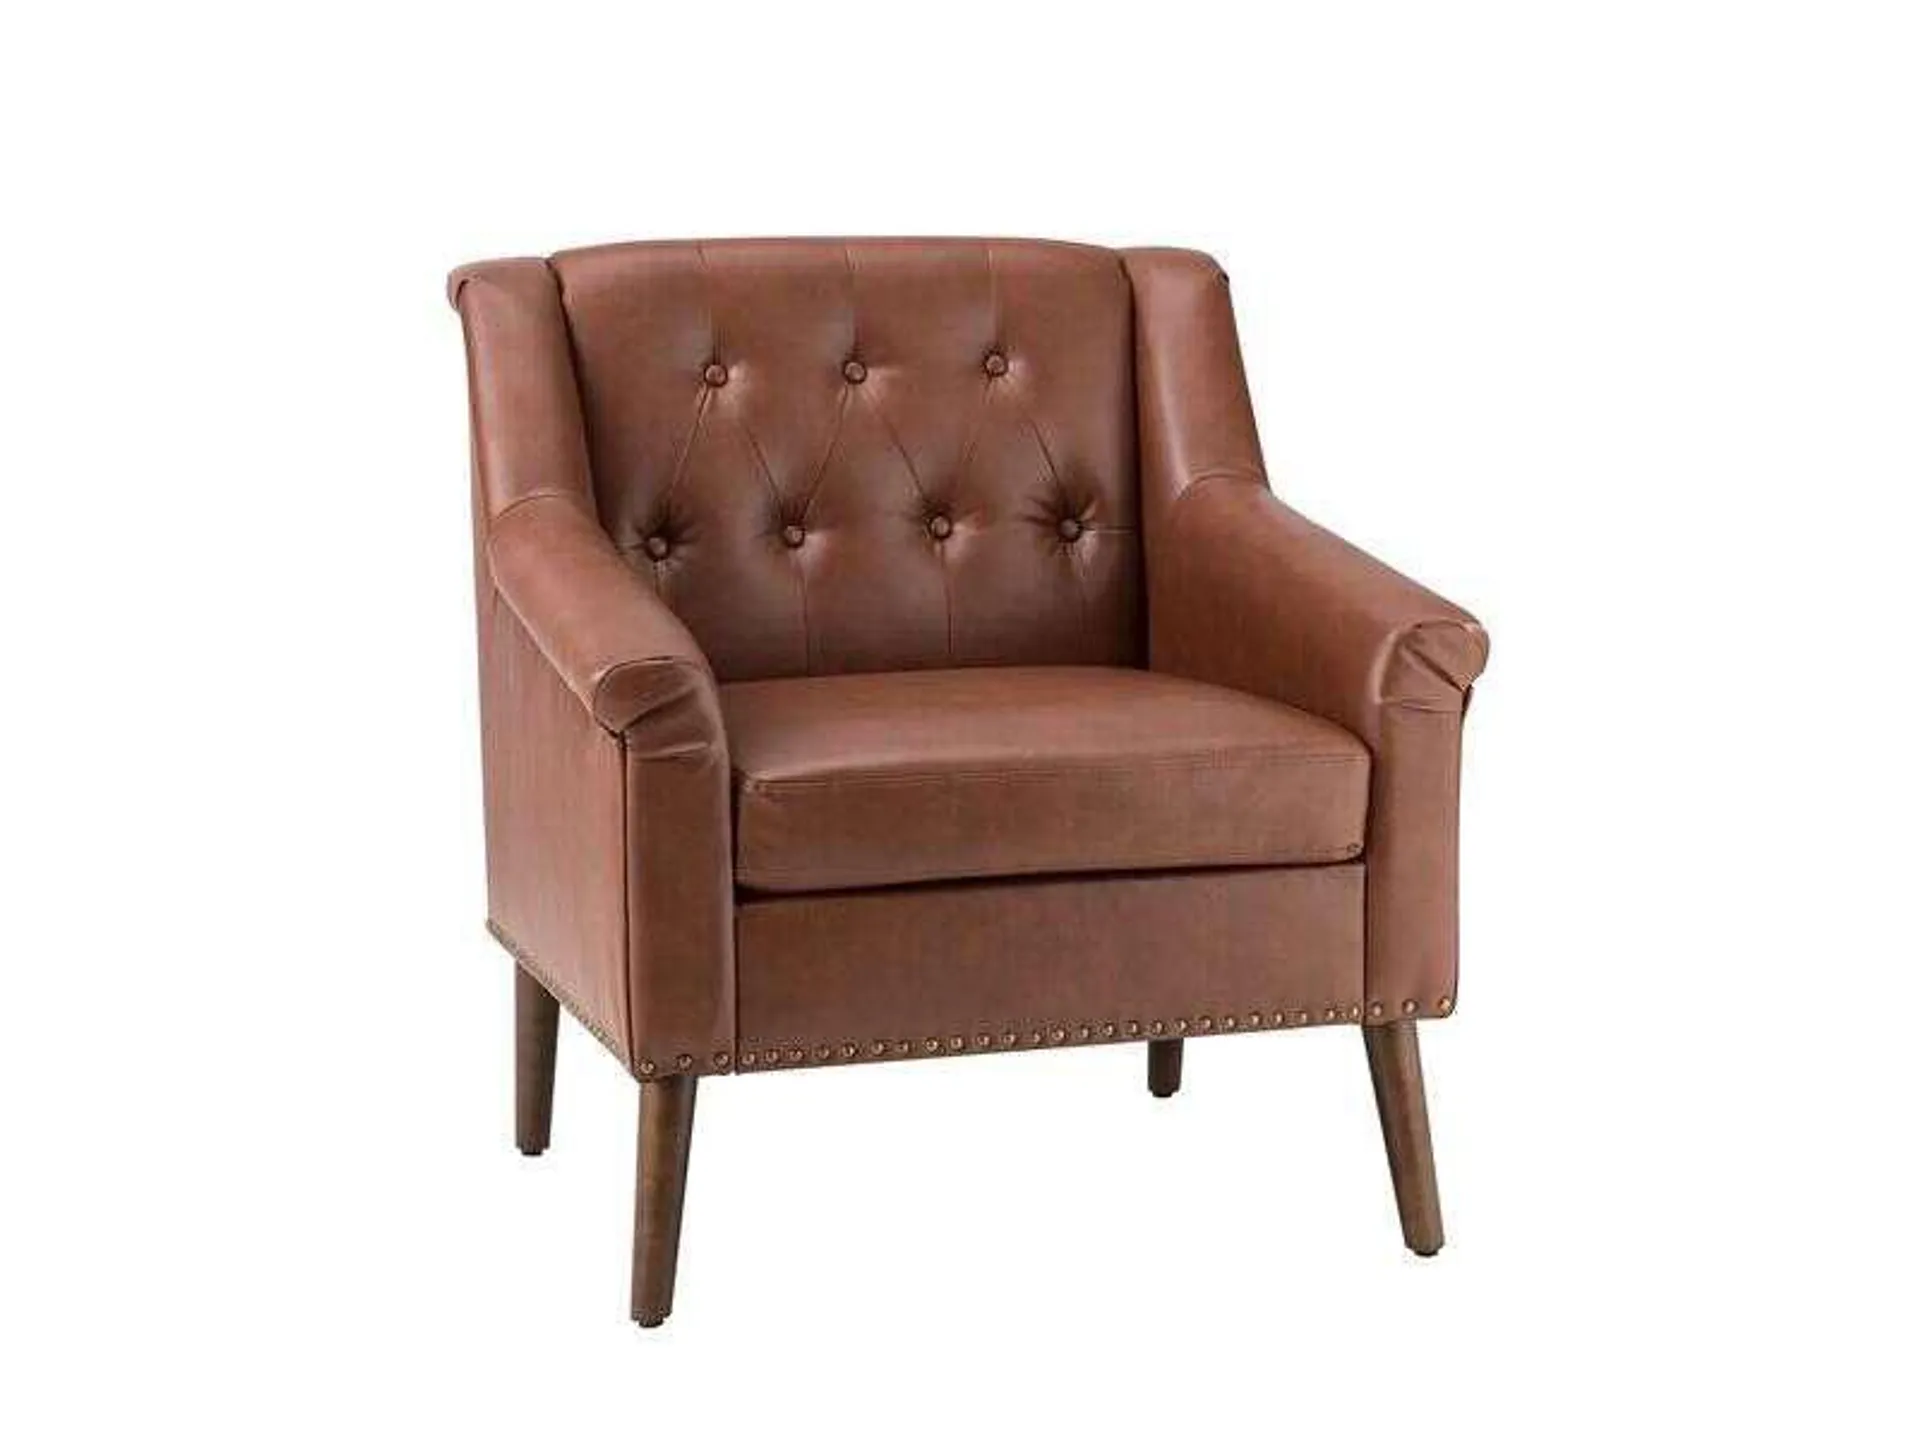 Comfy Transitional Wooden Upholstery Armchair with Nailhead Trim